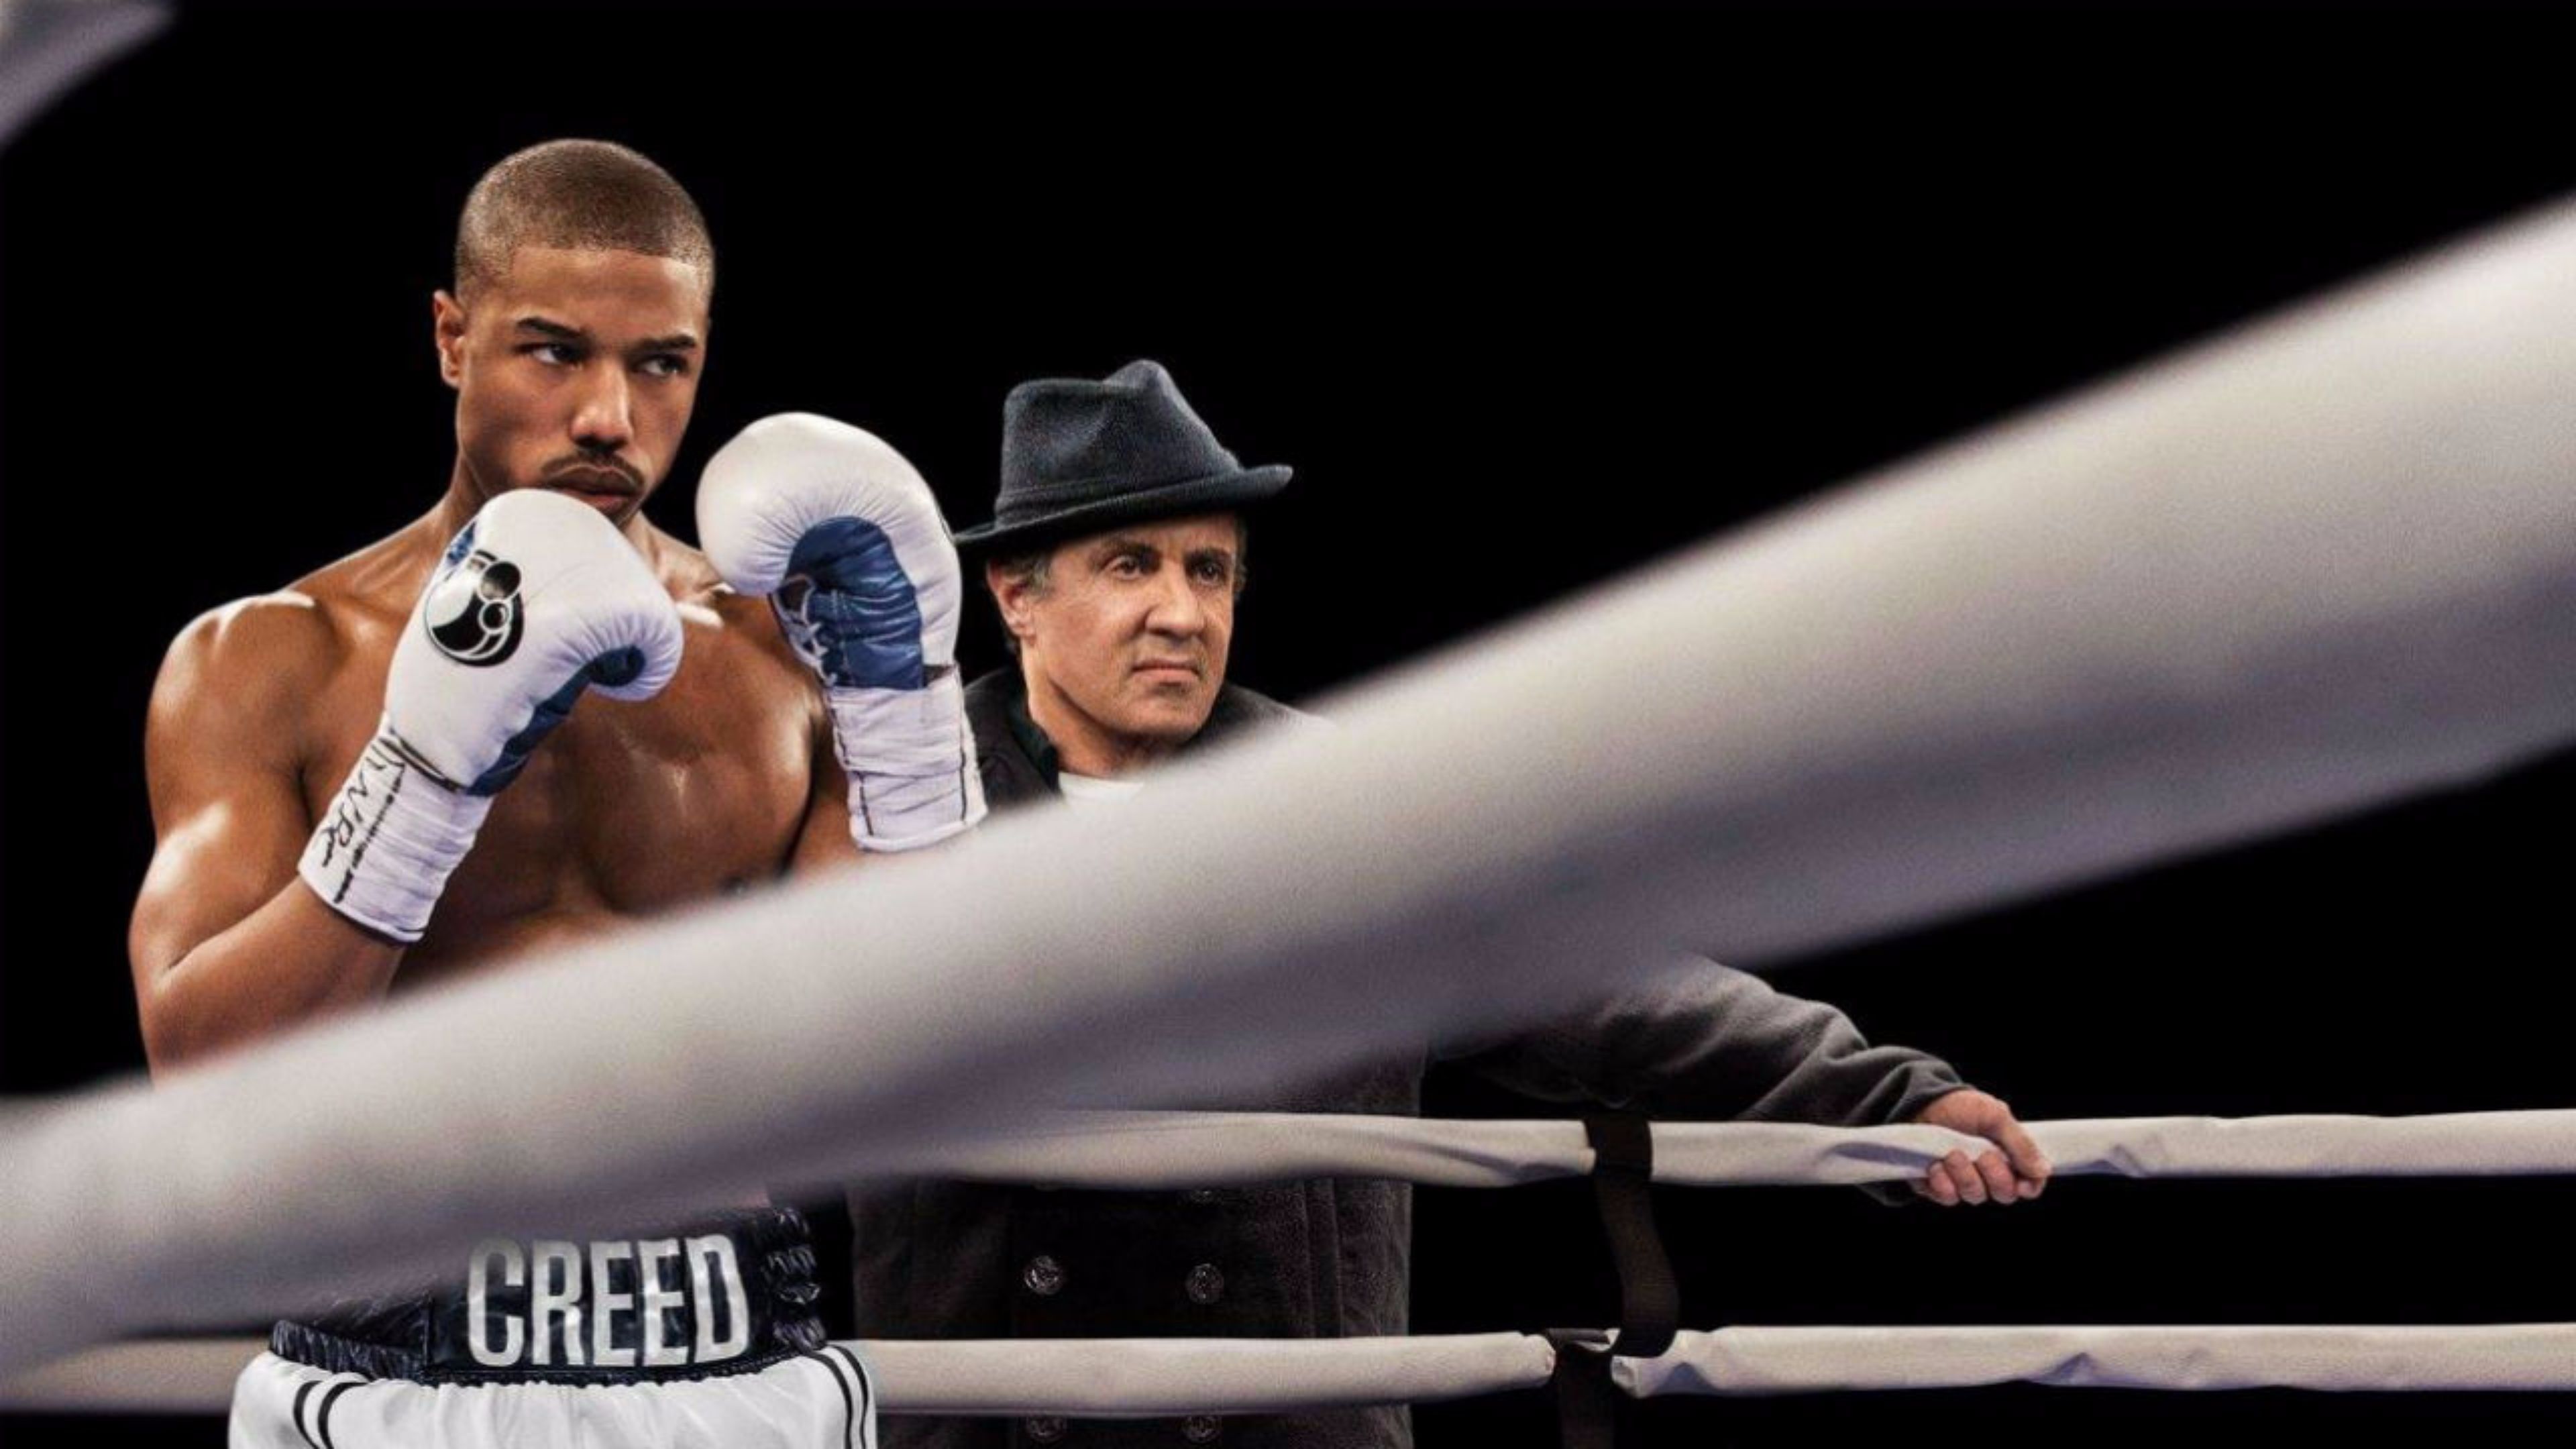 Creed Wallpapers Hd Creed Backgrounds - Creed Michael B Jordan Wallpaper Hd , HD Wallpaper & Backgrounds